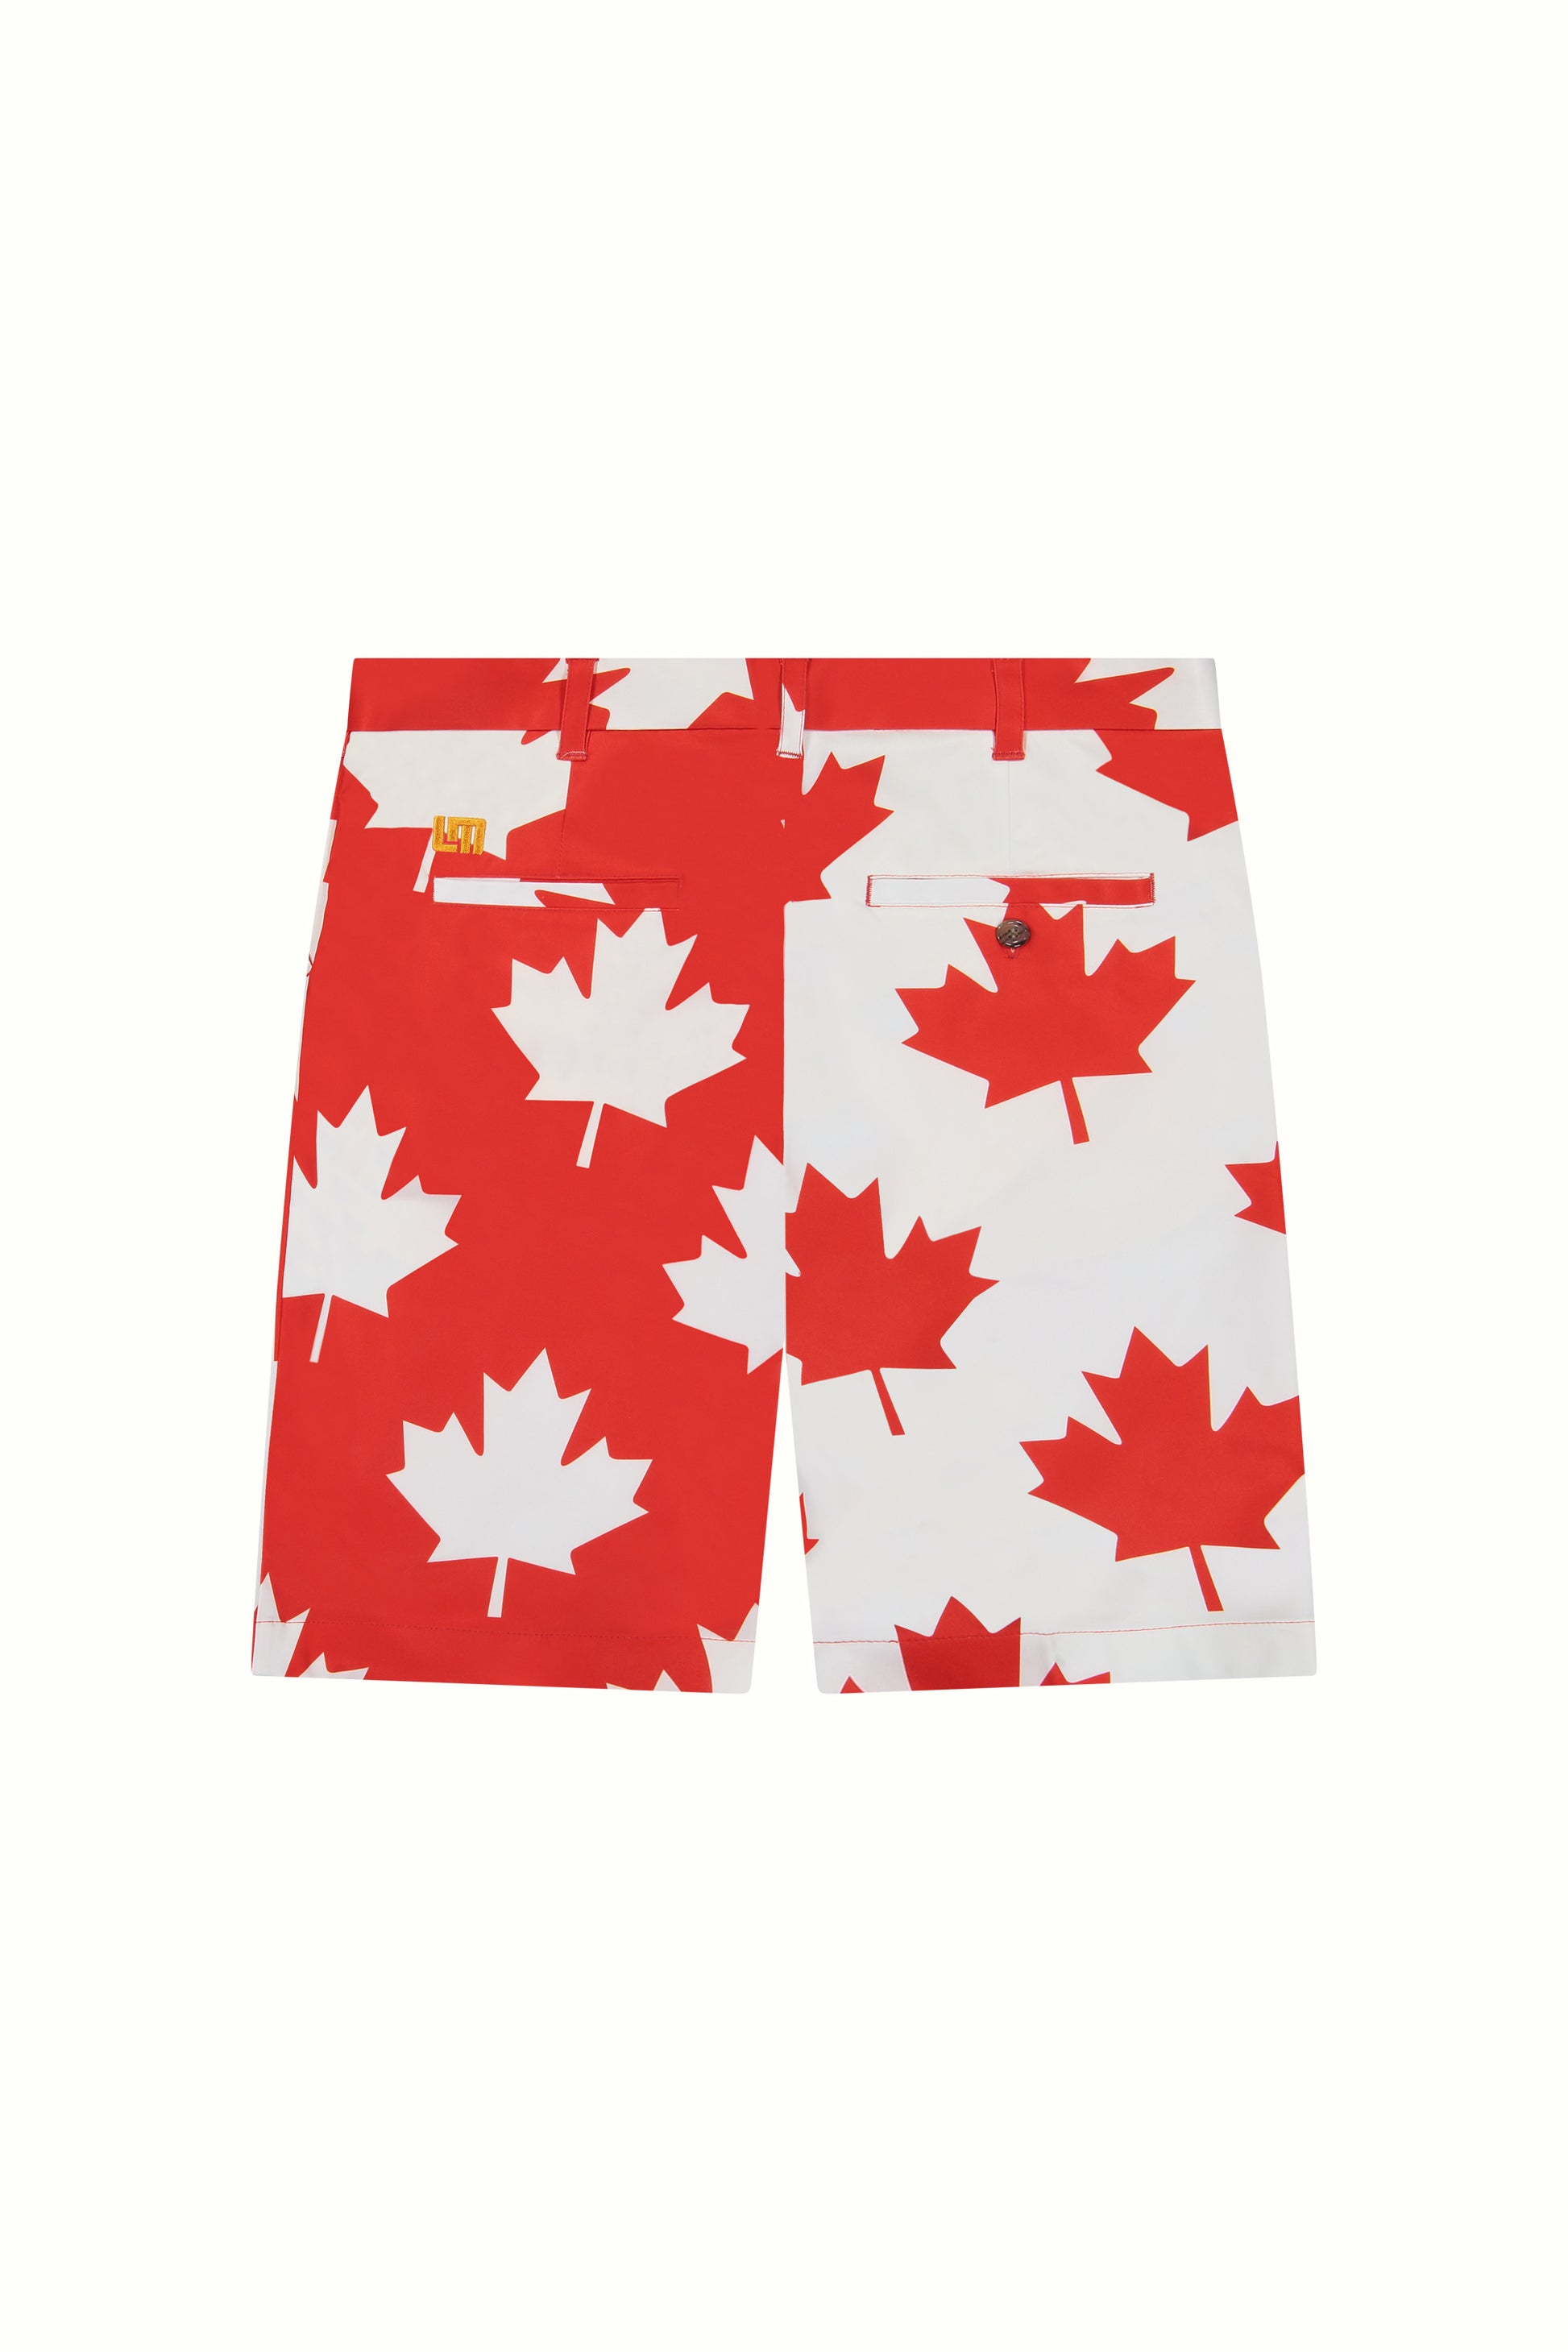 Red and white shorts with a maple leaf print